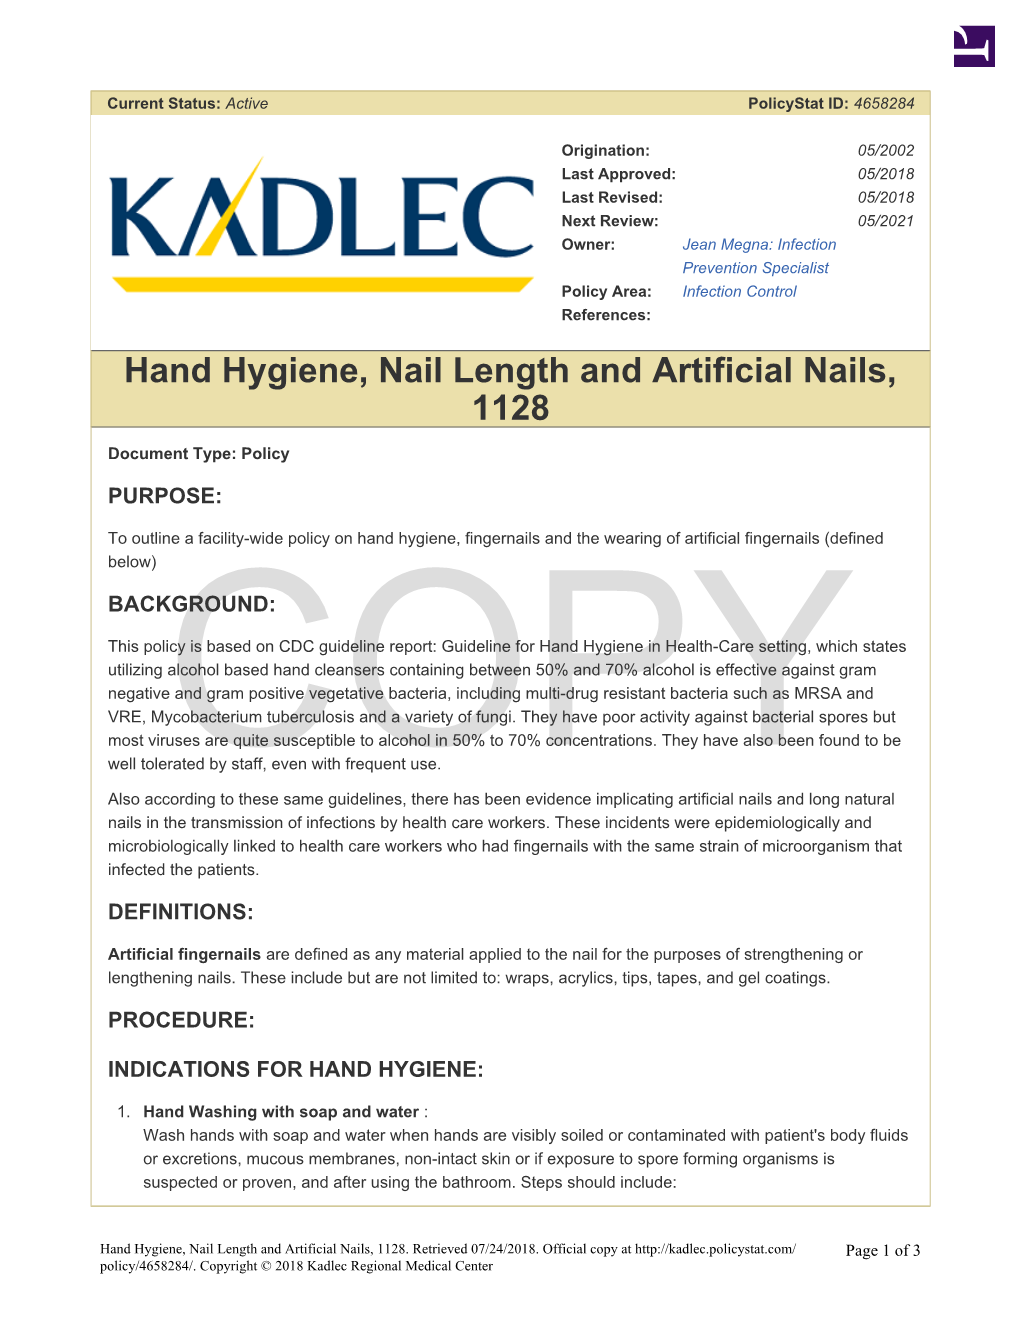 Hand Hygiene, Nail Length, and Artificial Nails, 1128